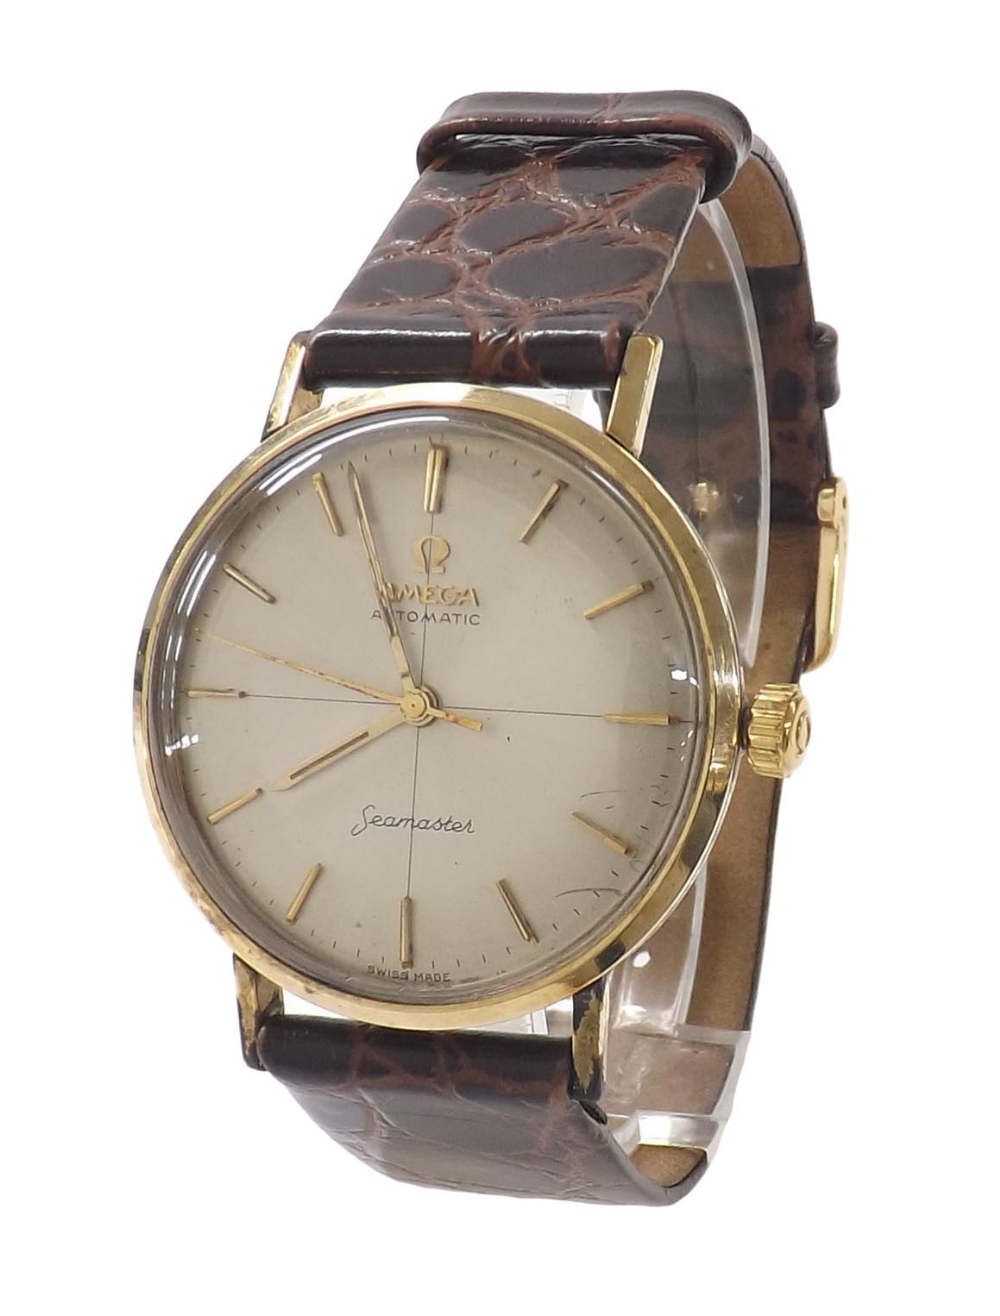 Omega Seamaster 14k gold filled automatic gentleman's wristwatch, silvered dial with baton